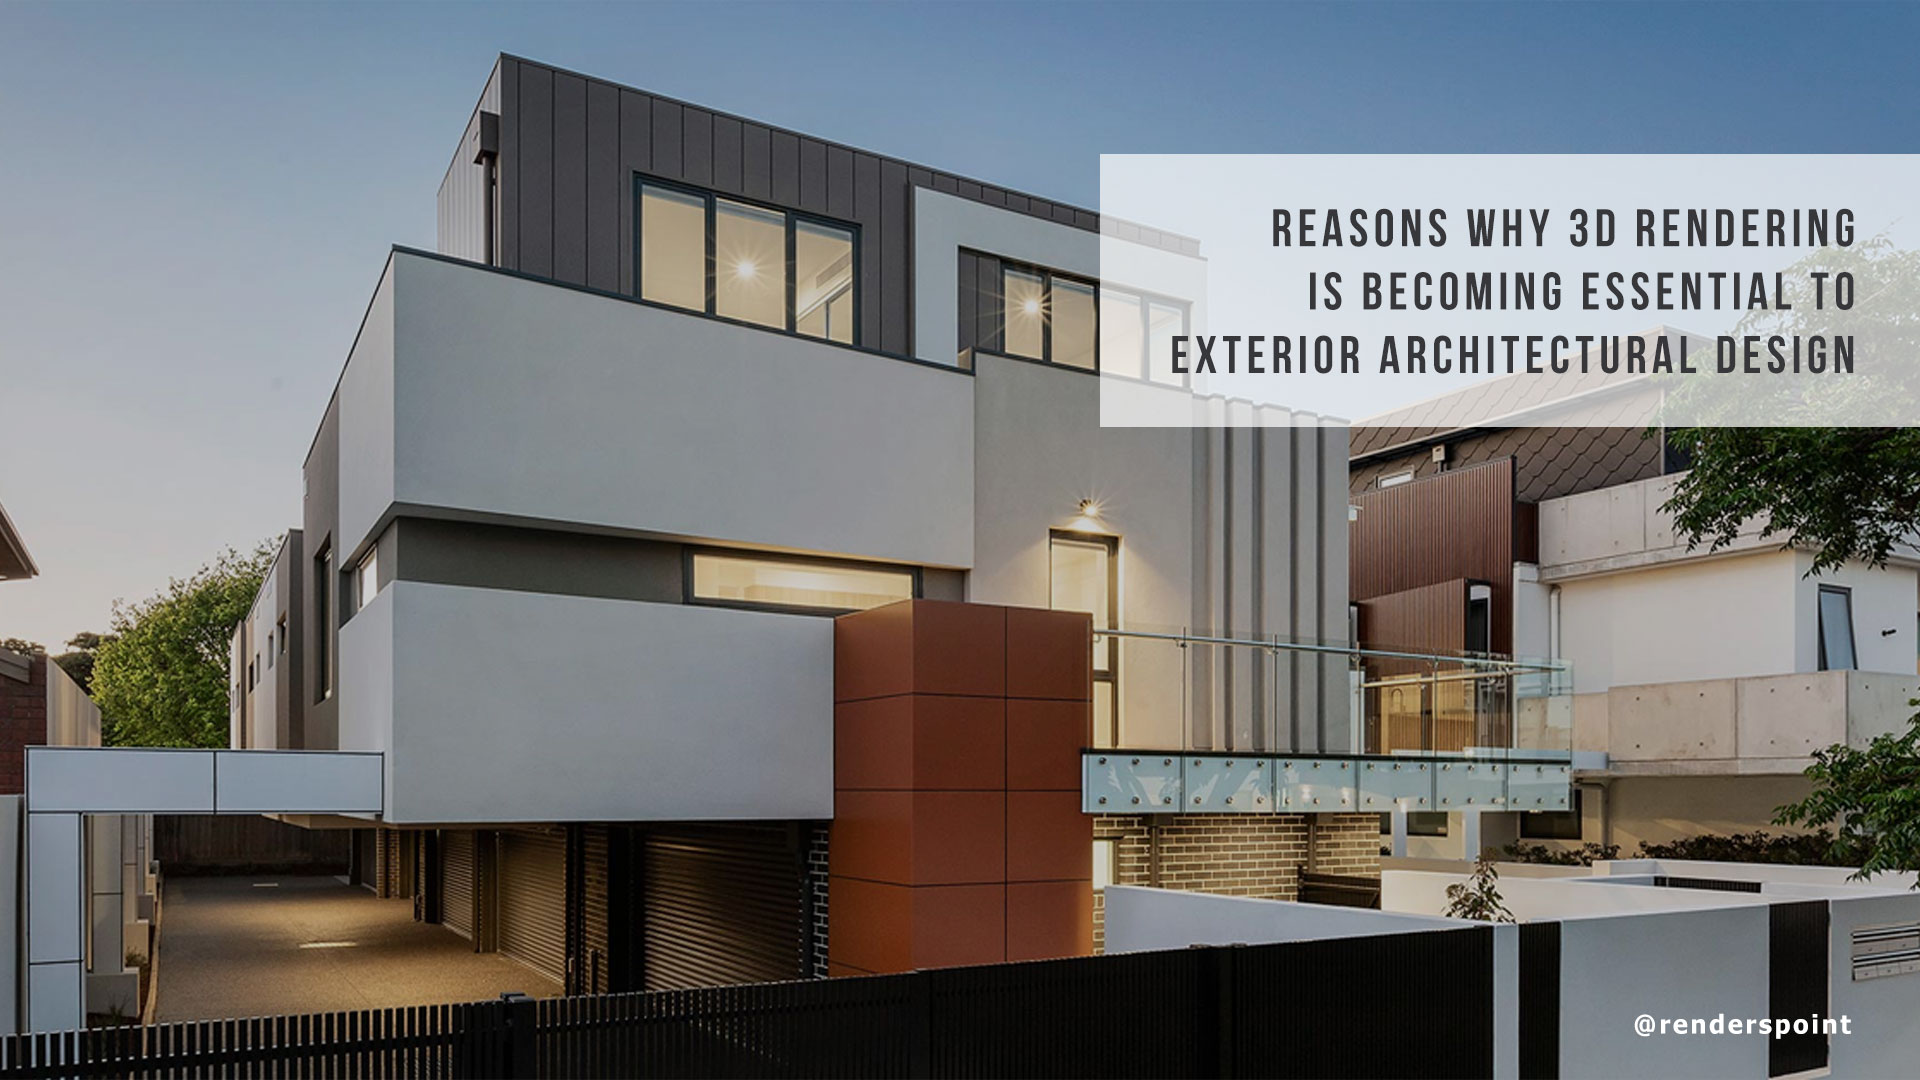 Reasons why 3D Rendering is Becoming Essential to Exterior Architectural Design